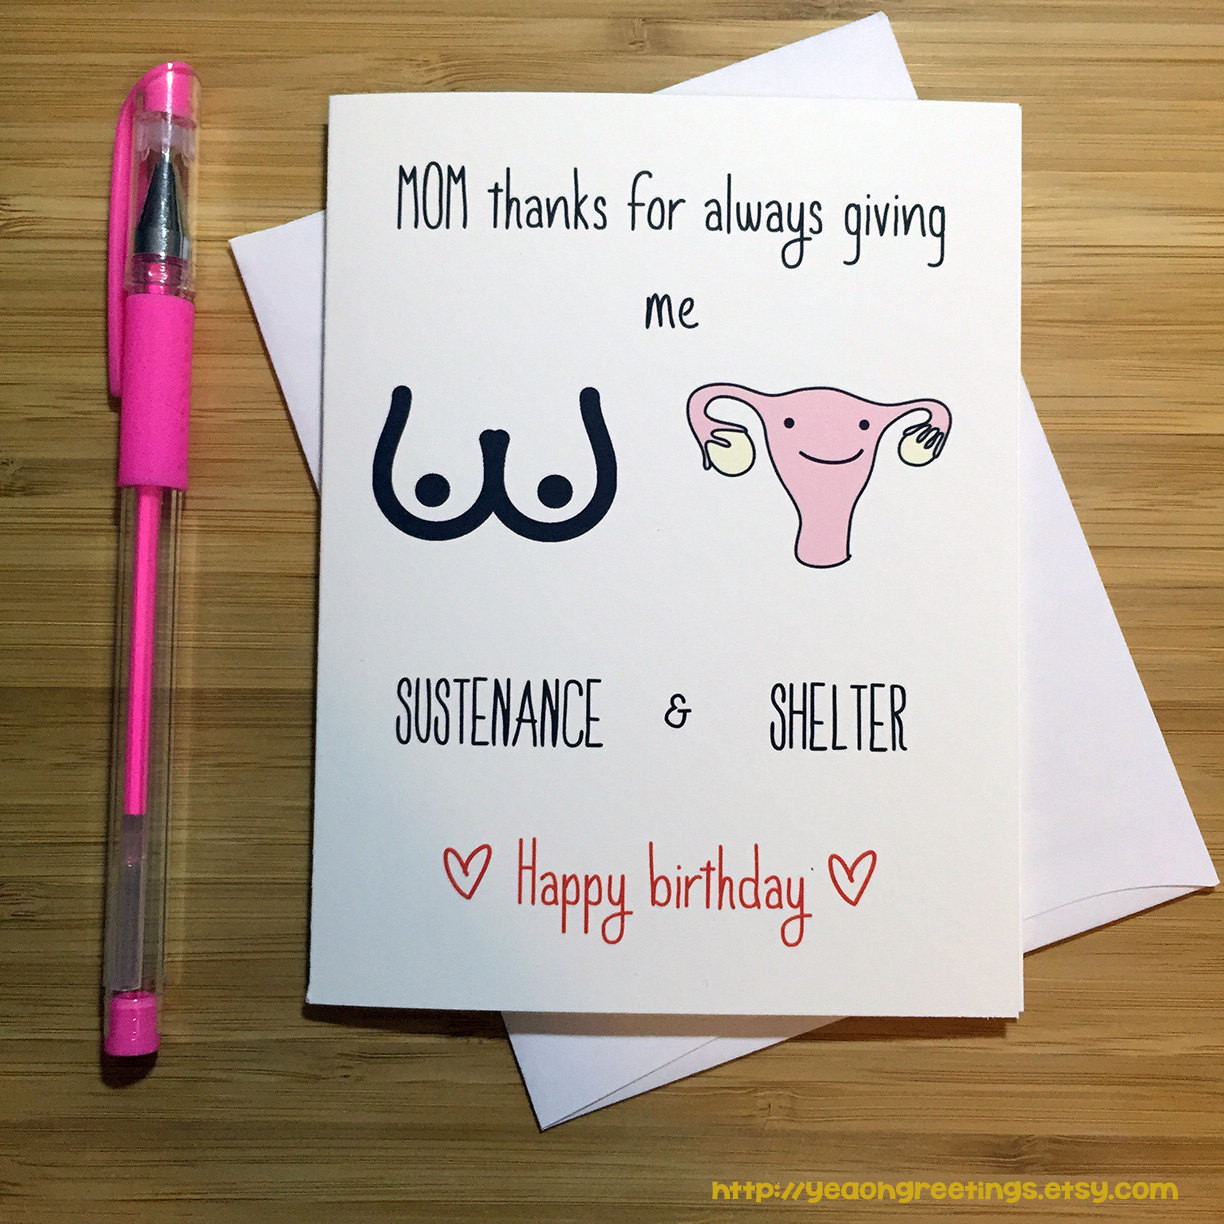 Funny Birthday Cards Ideas The Best Ideas For Happy Birthday Card Ideas Home Inspiration And